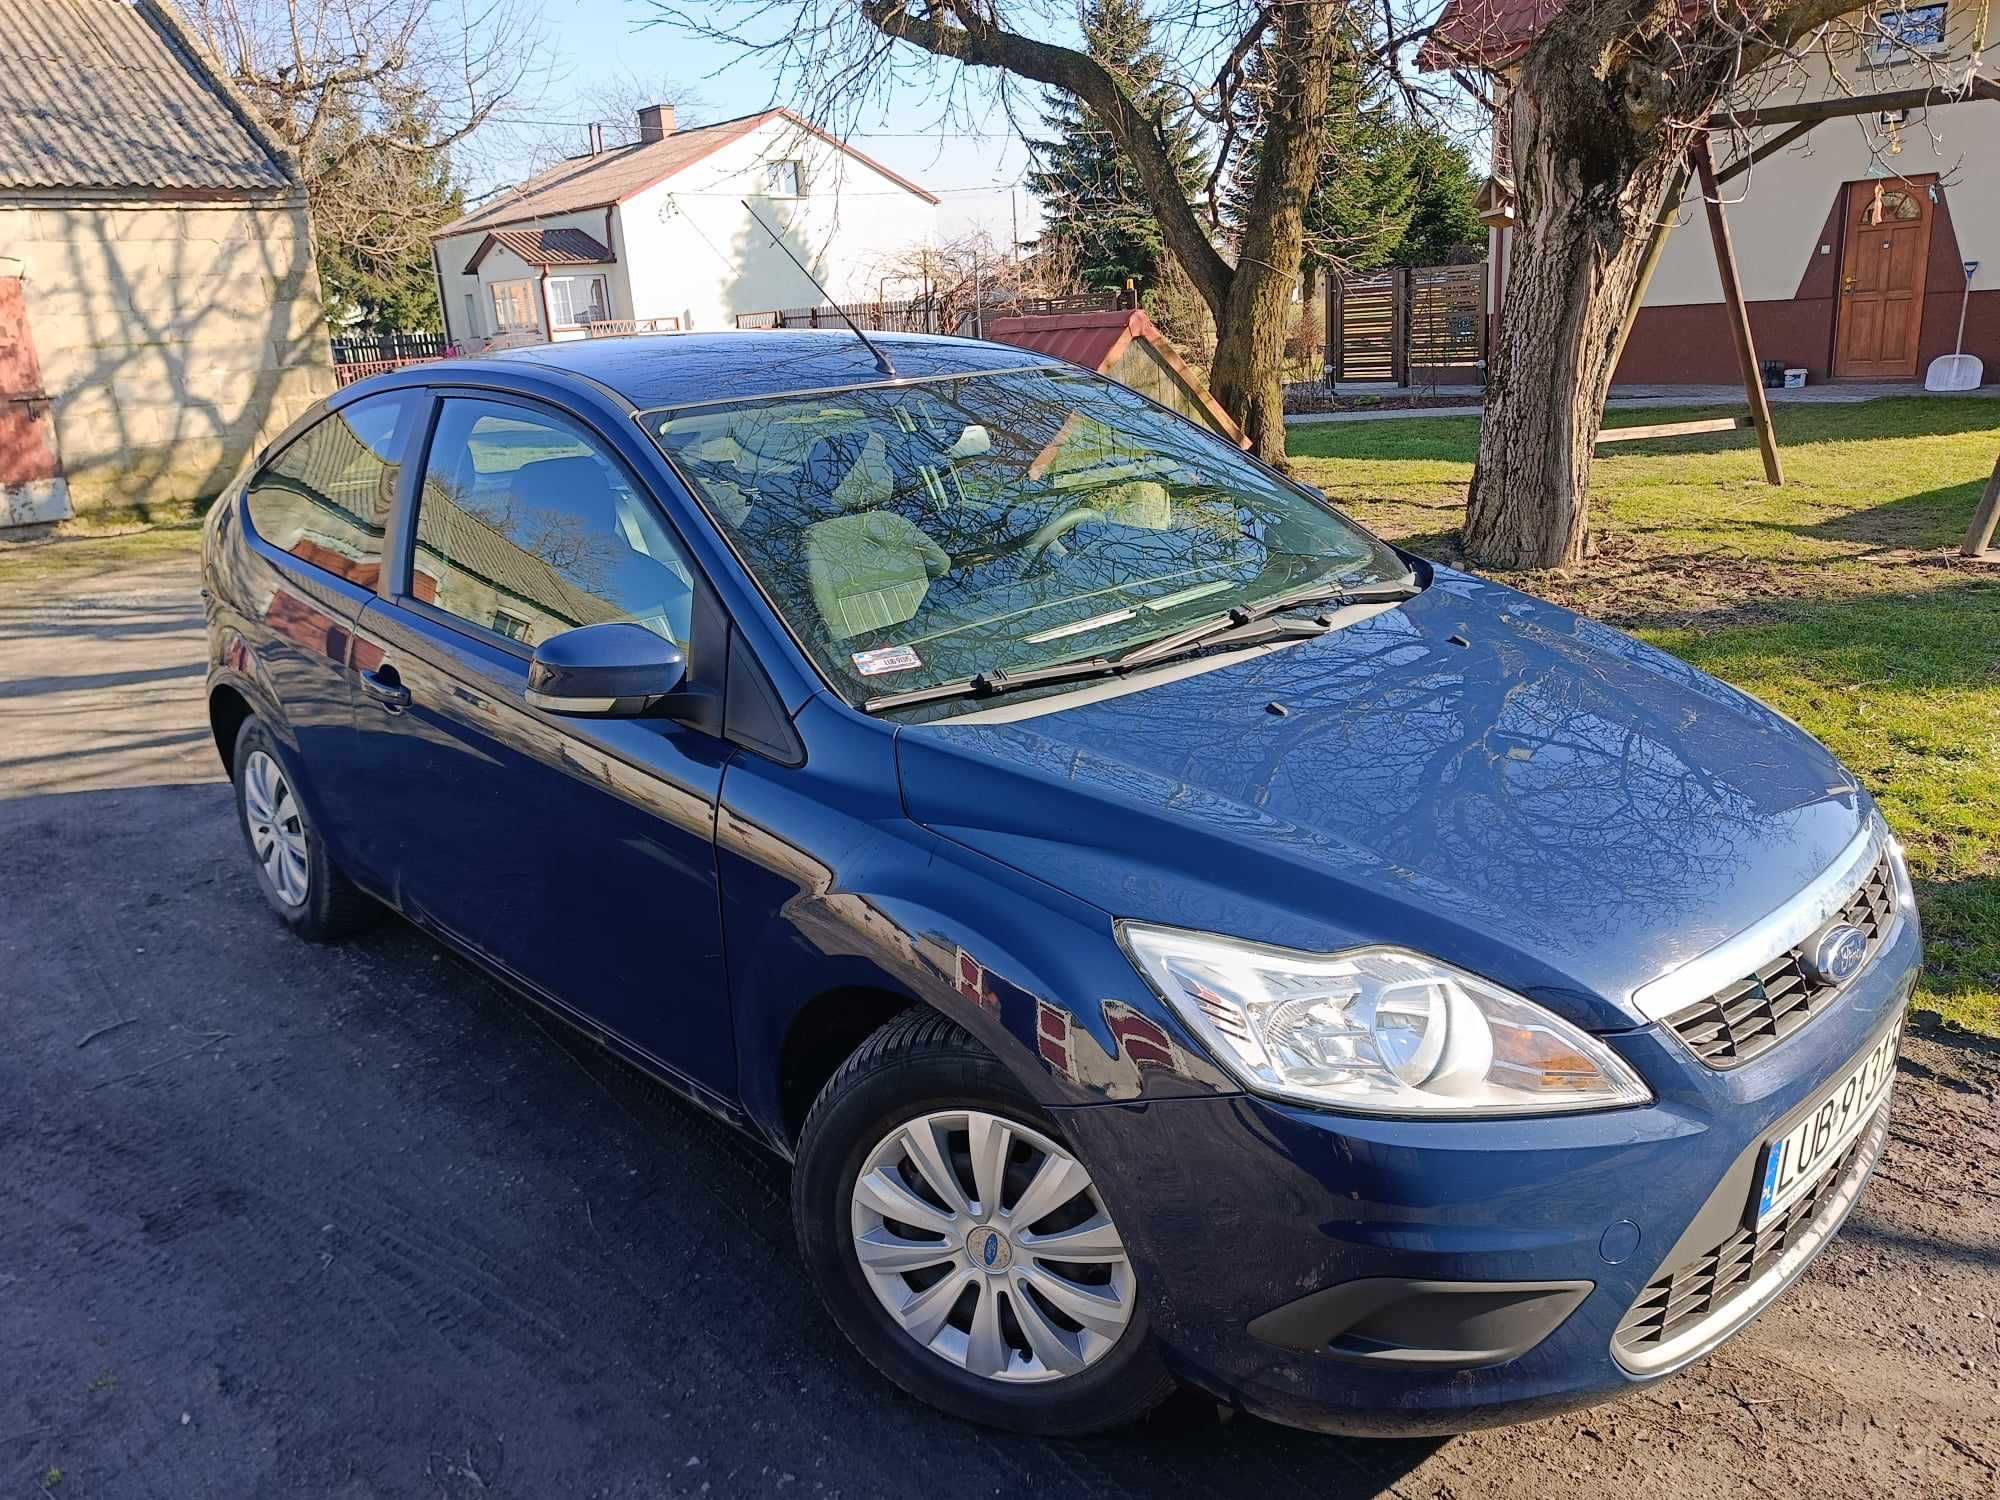 Ford Focus MK2 1.4 Benzyna